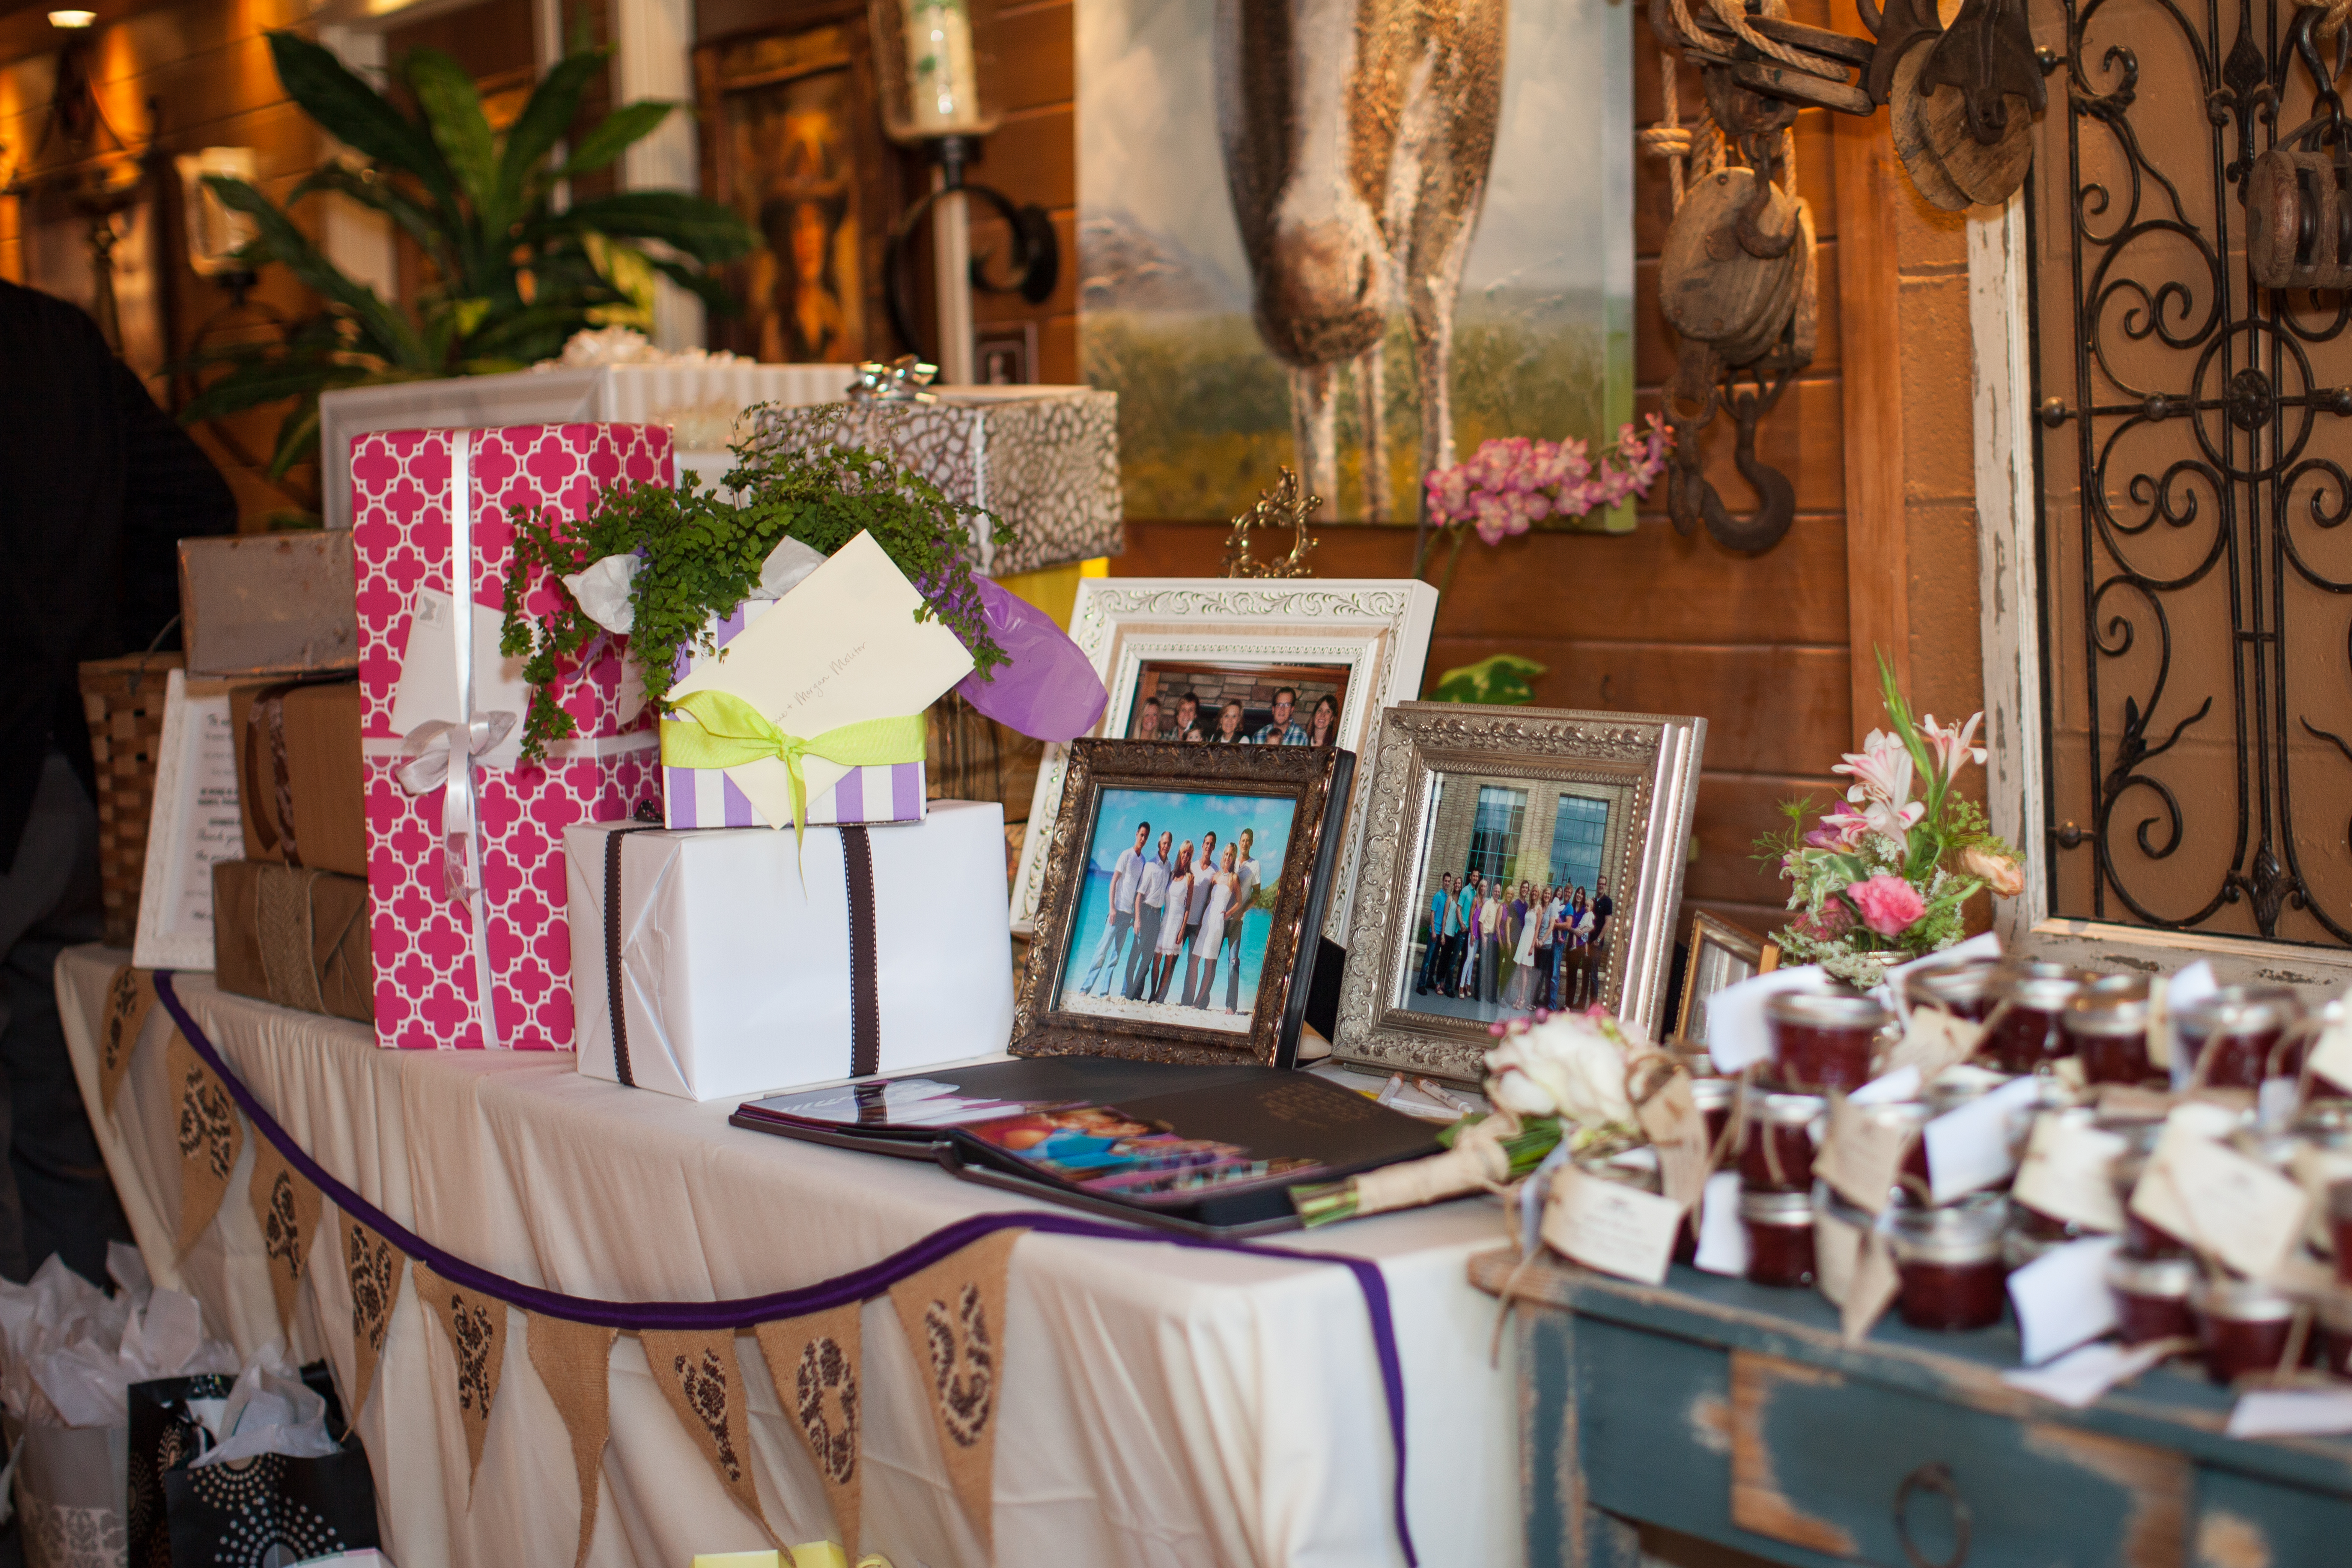 Decorating the gift table for your wedding